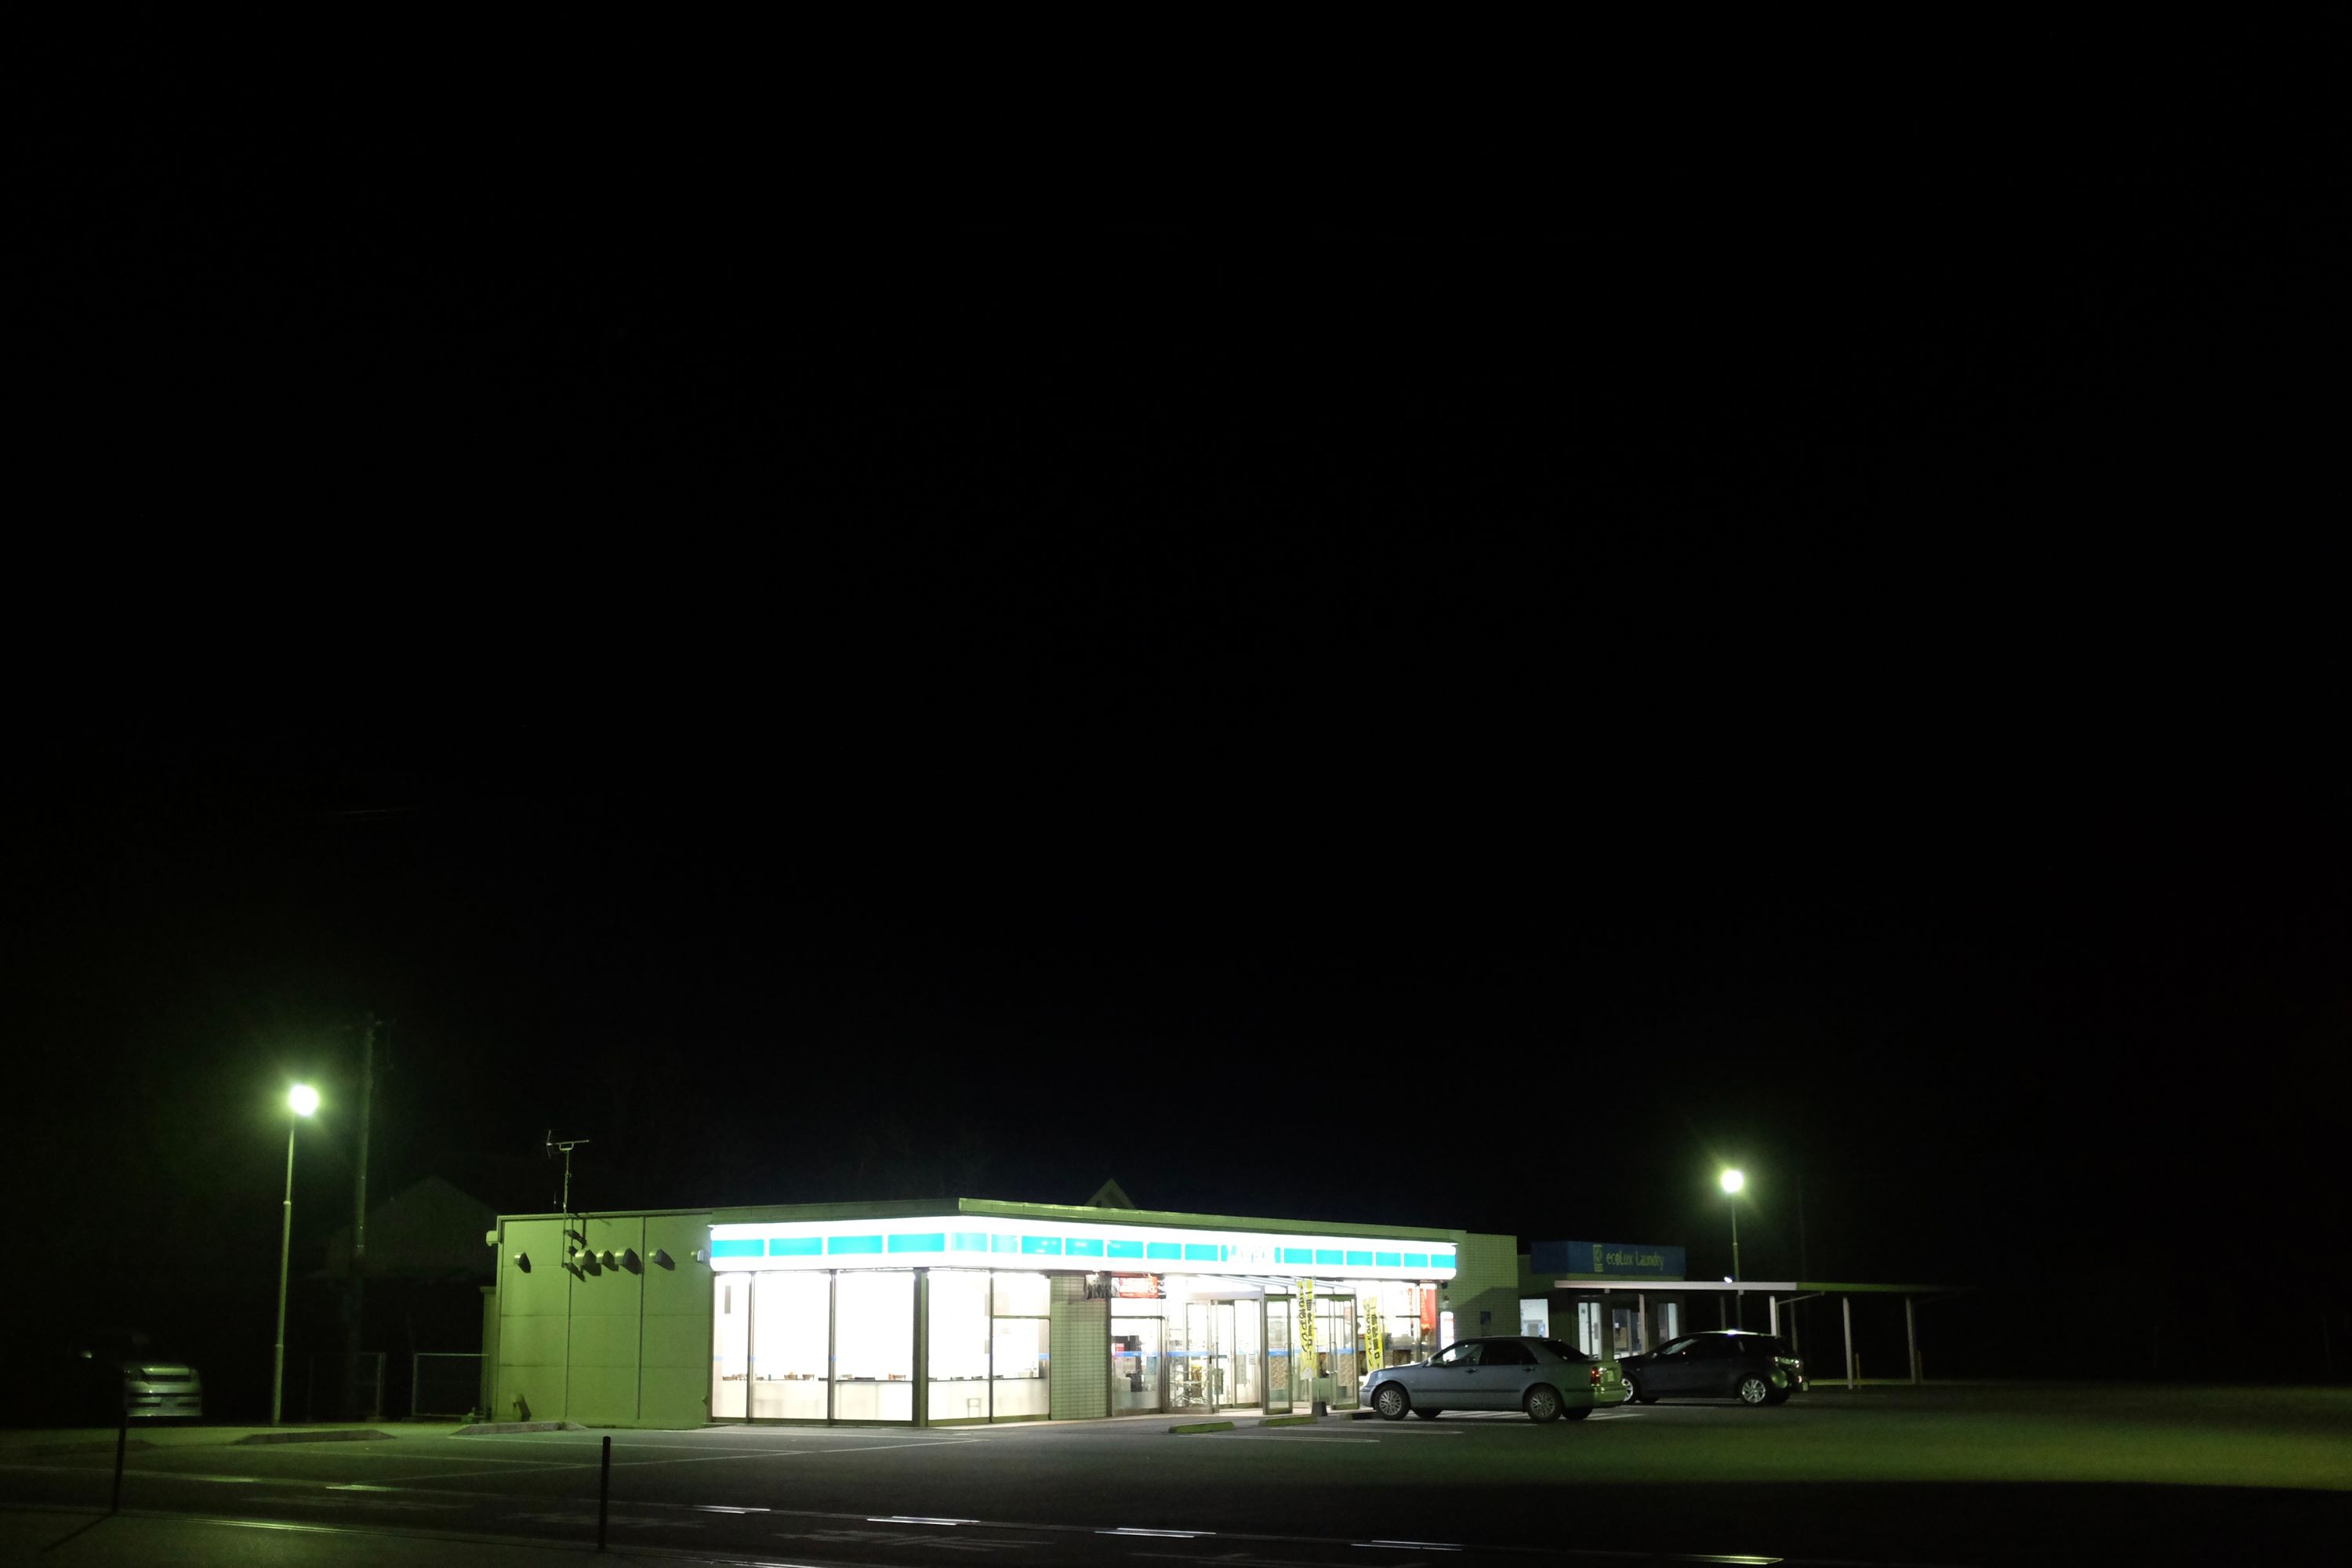 A Lawson convenience store on a pitch black evening, lit up and seen from across its parking lot.